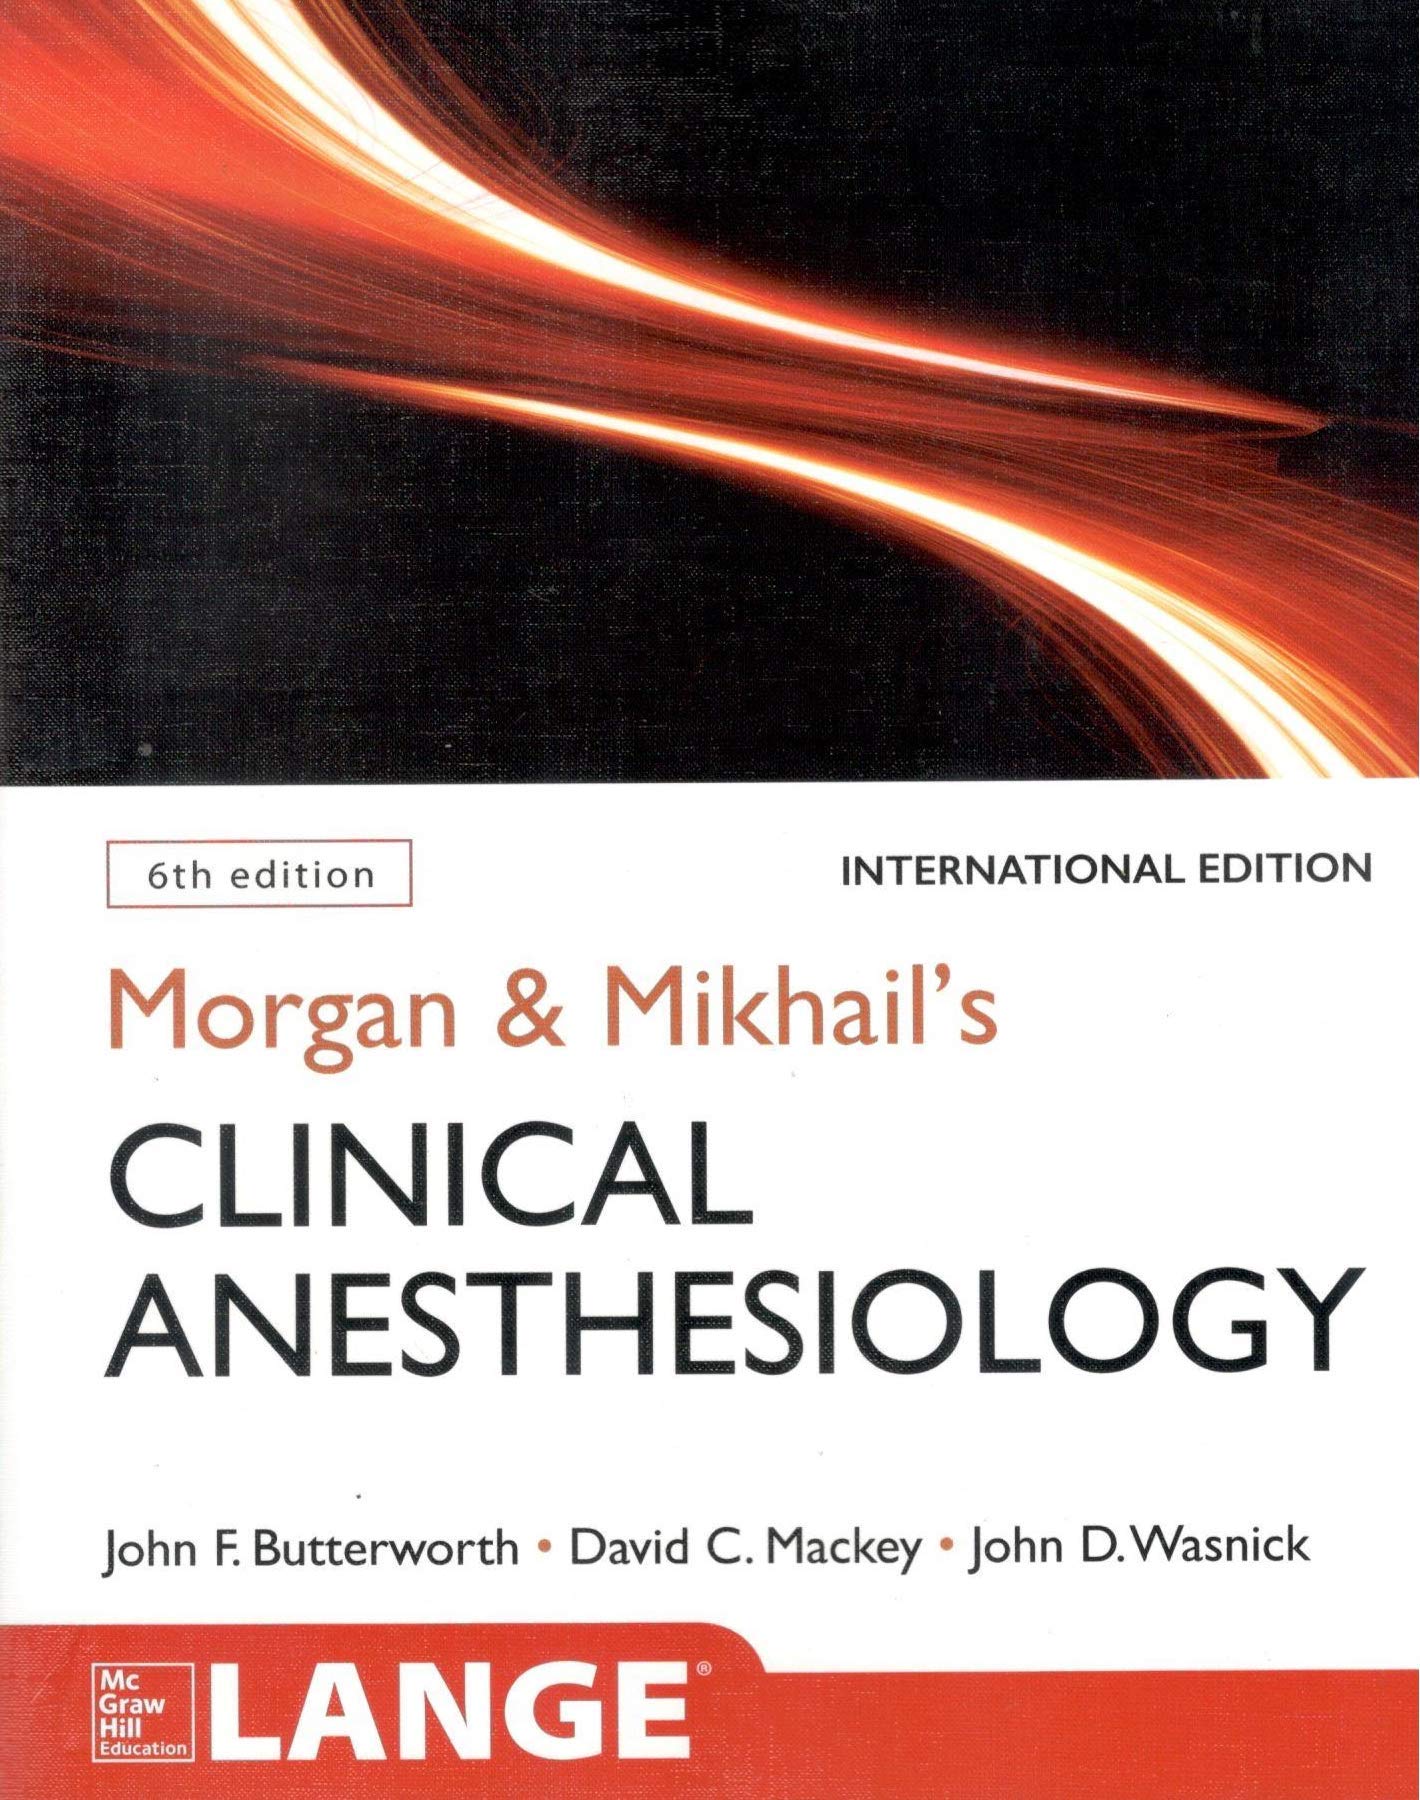 Morgan And Mikhail'S Clinical Anesthesiology, 6Th Edition